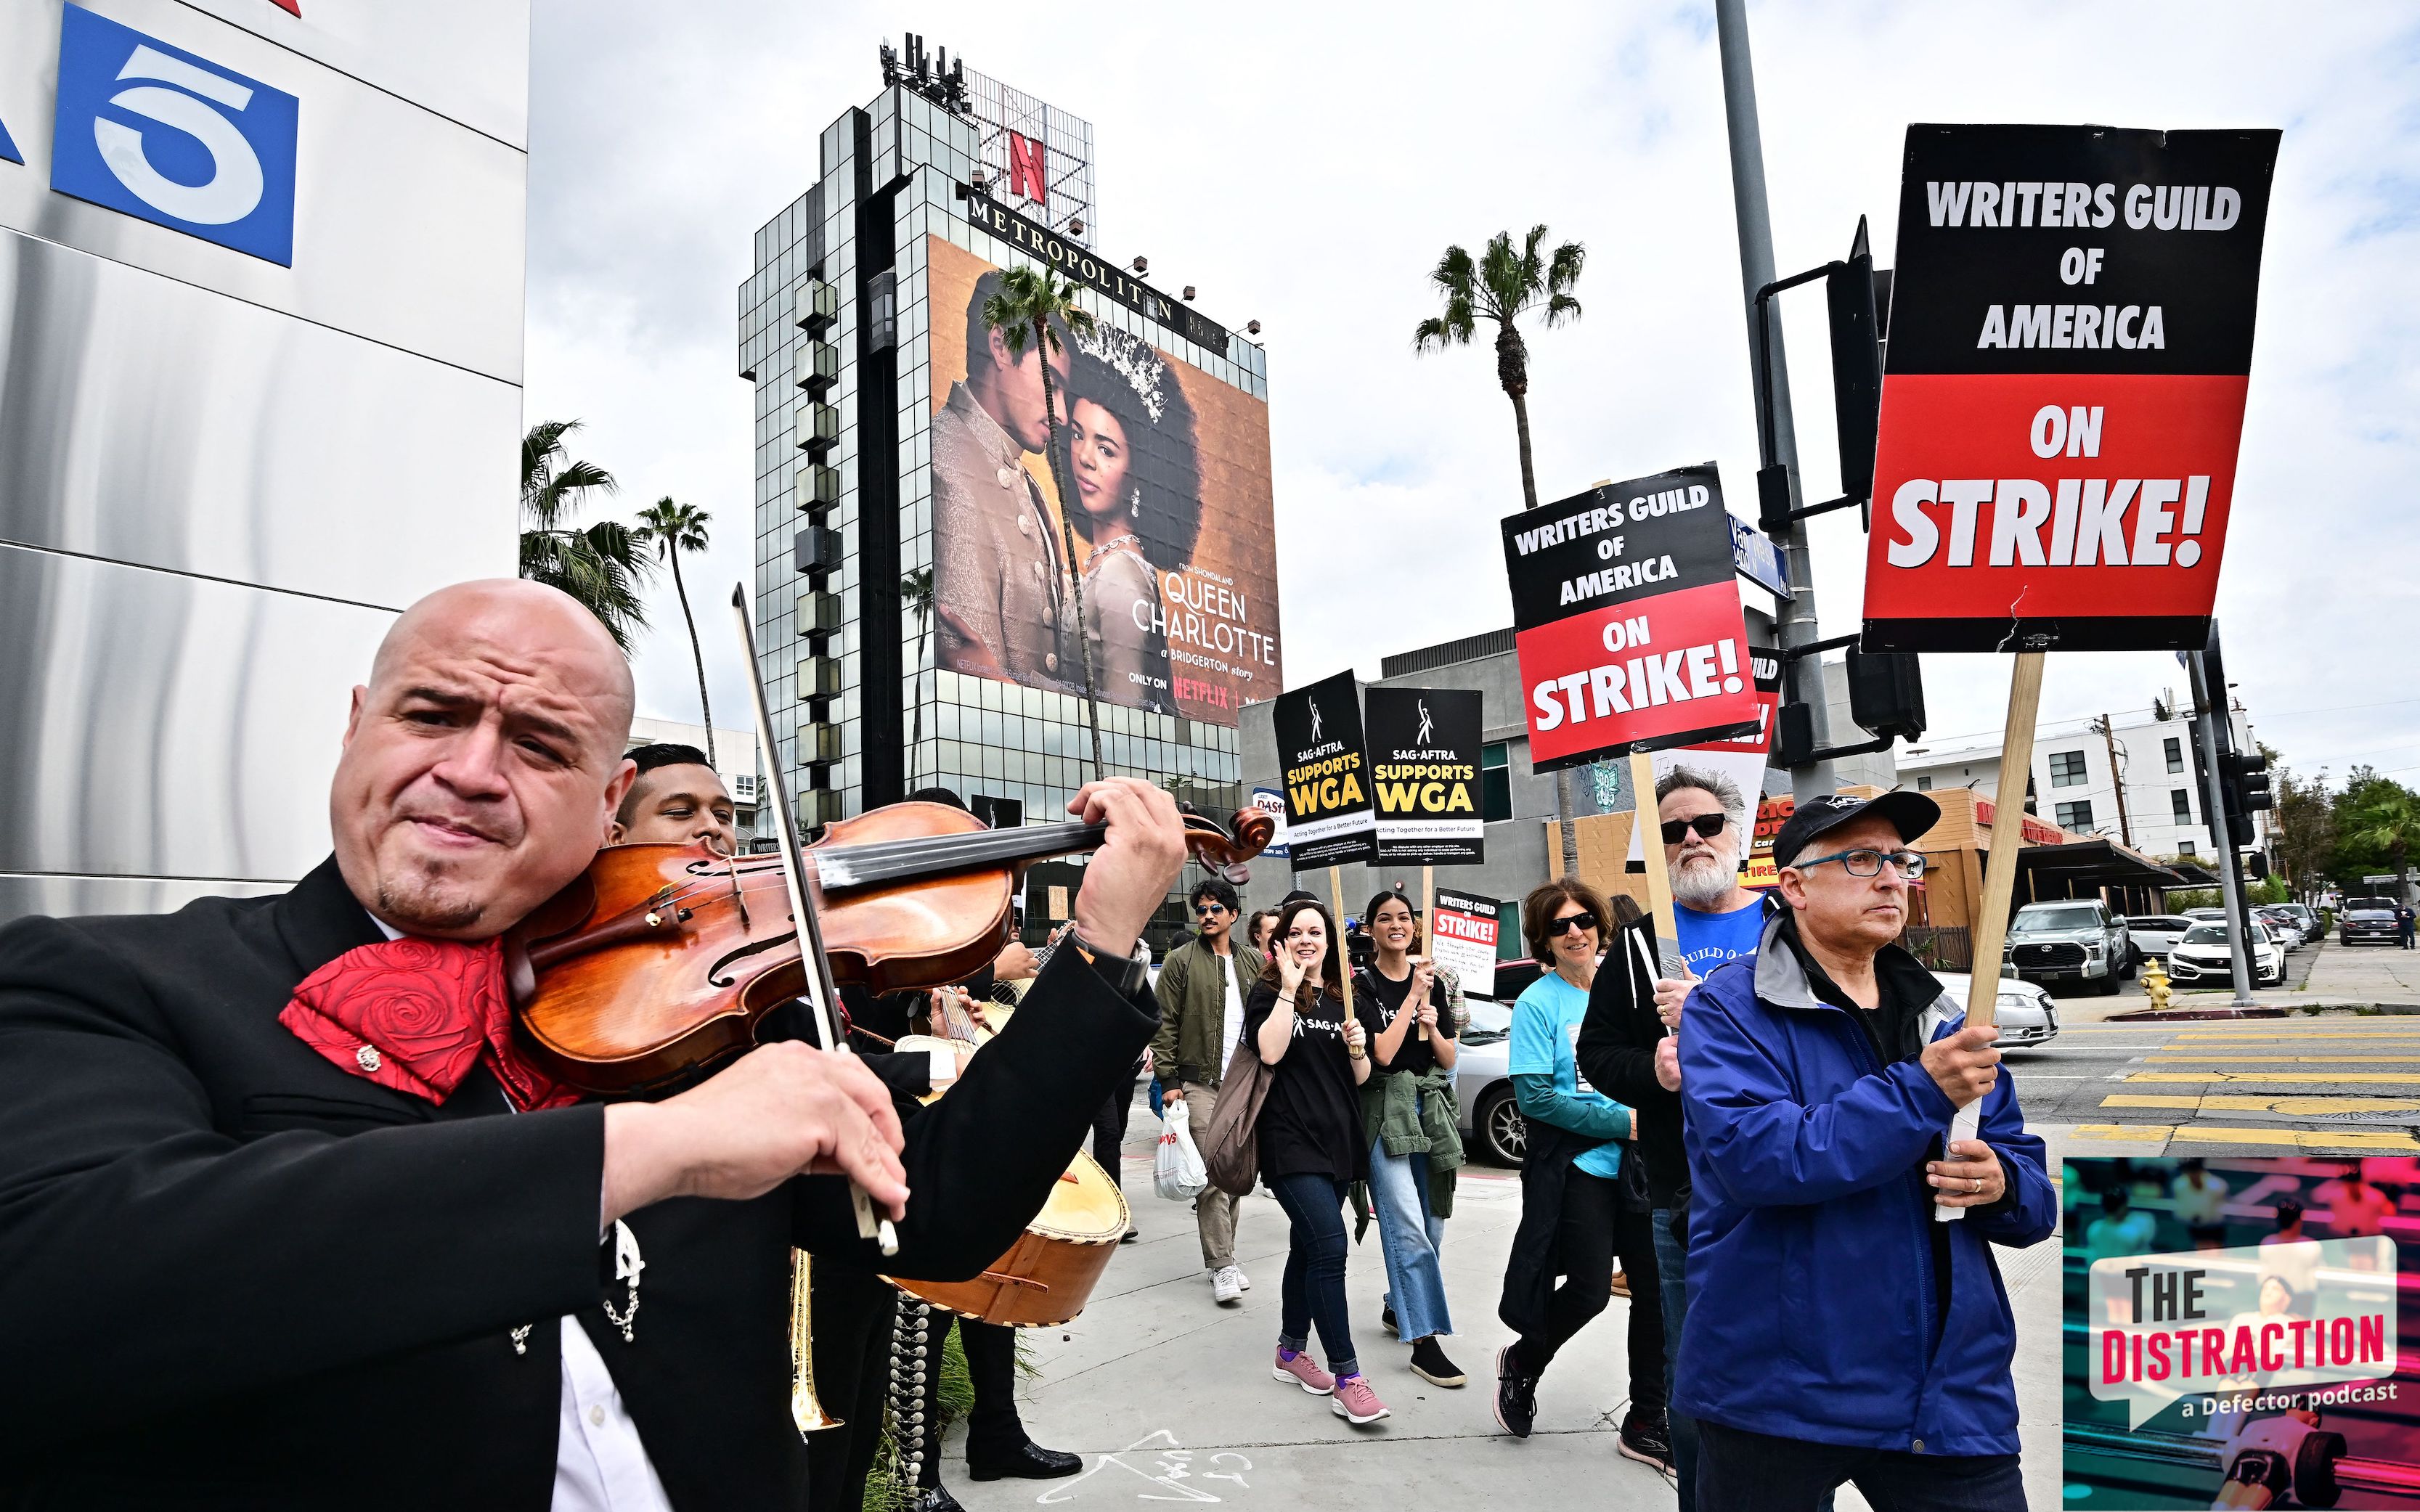 A Mariachi Band performs on Cinco De Mayo as writers on strike march with signs on the picket line on day four of the strike by the Writers Guild of America in front of Netflix in Hollywood, California.